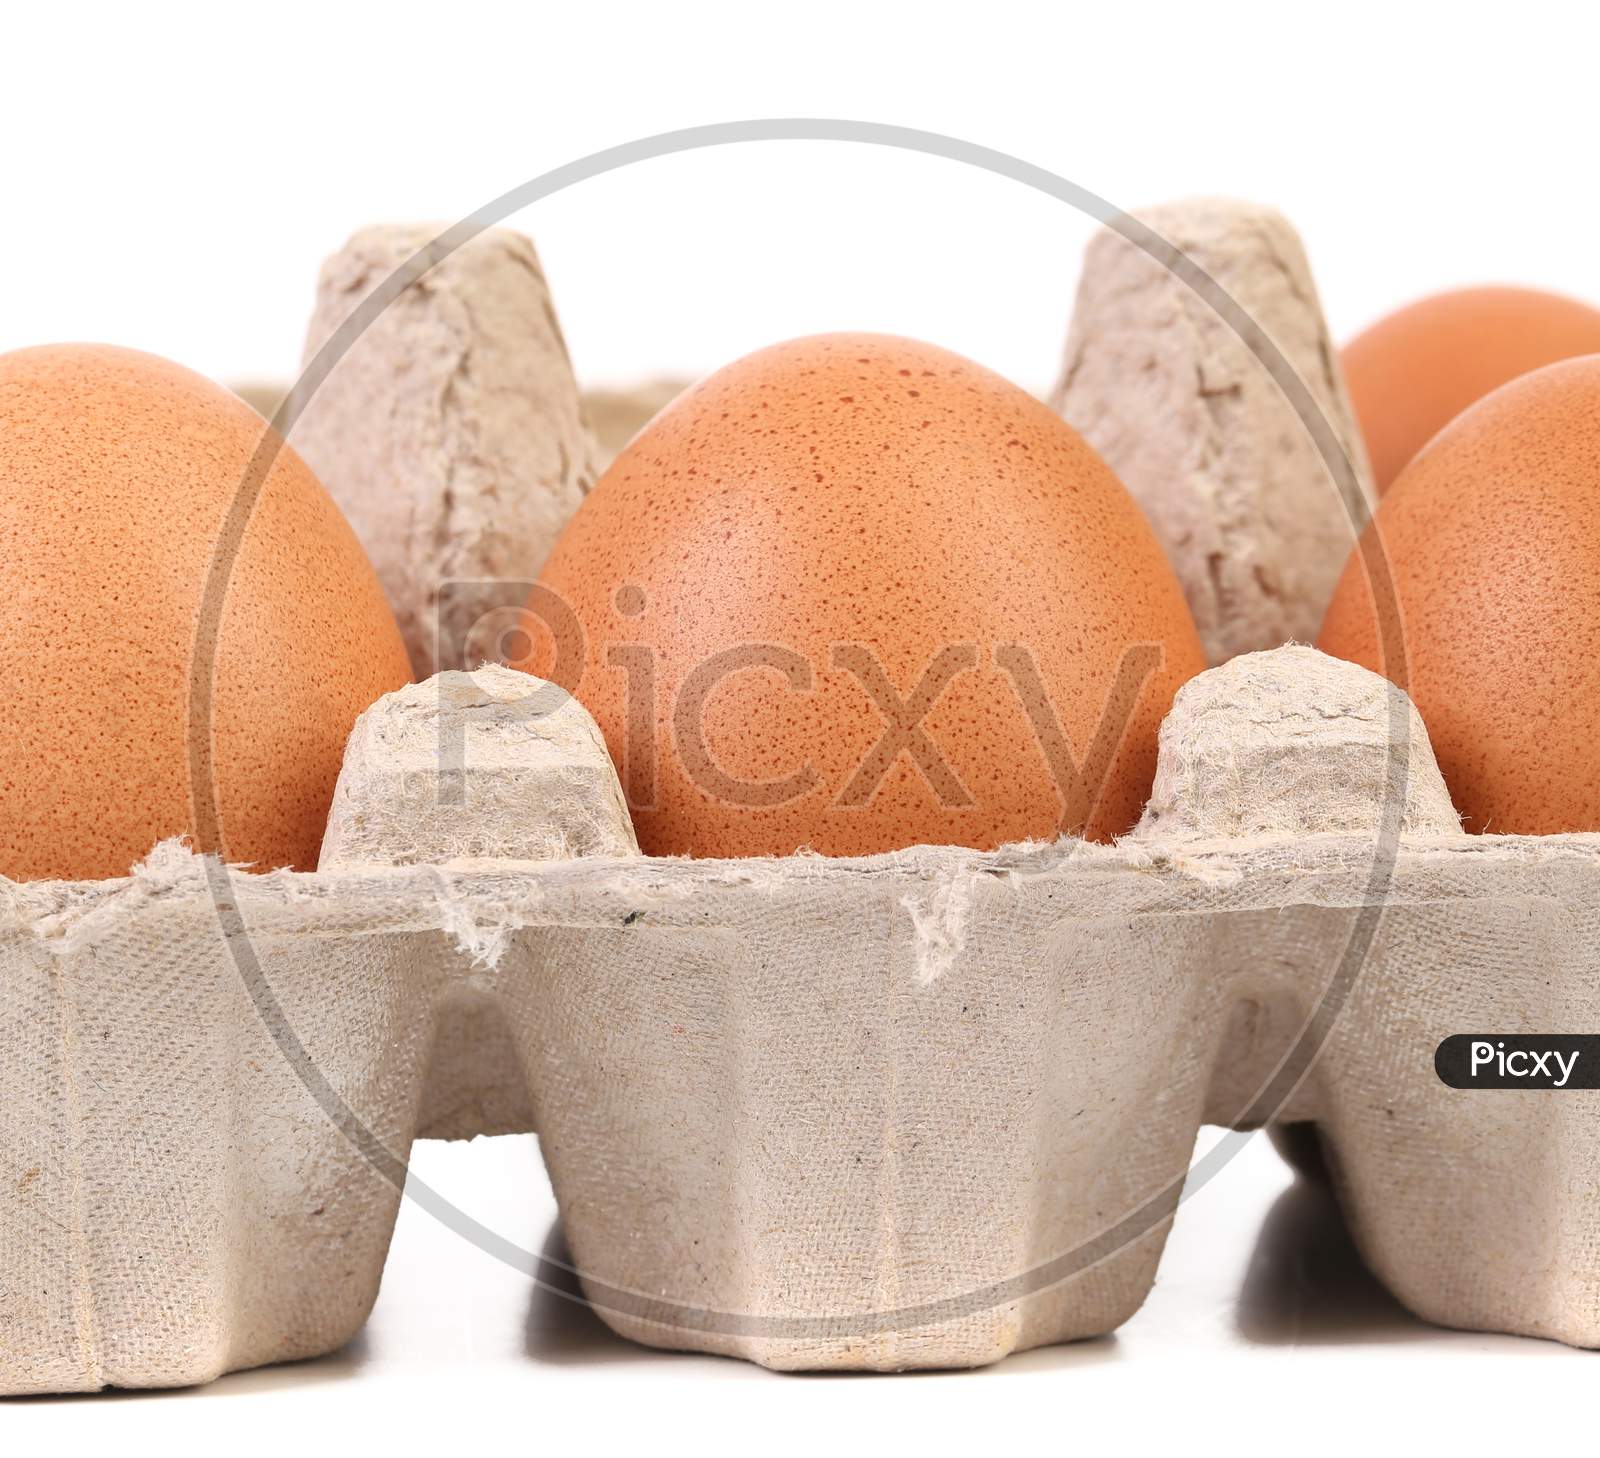 Brown Eggs In Egg Box. Isolated On A White Background.